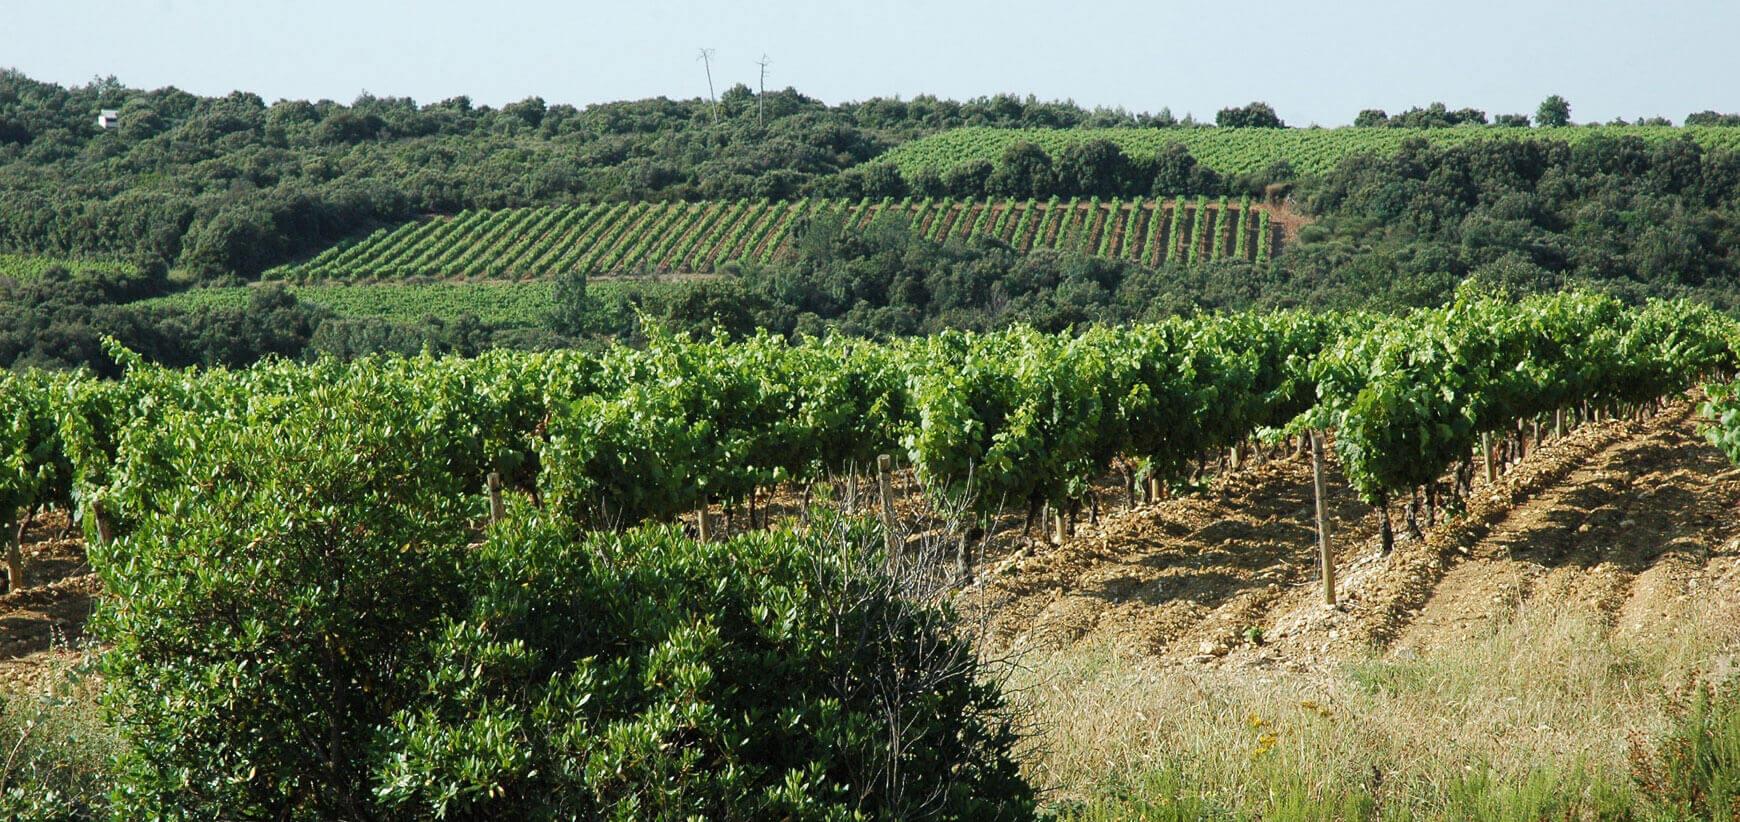 Domaine Deshenry's on the Côtes de Thongue terroir has been in the Bouchard family for 5 generations.